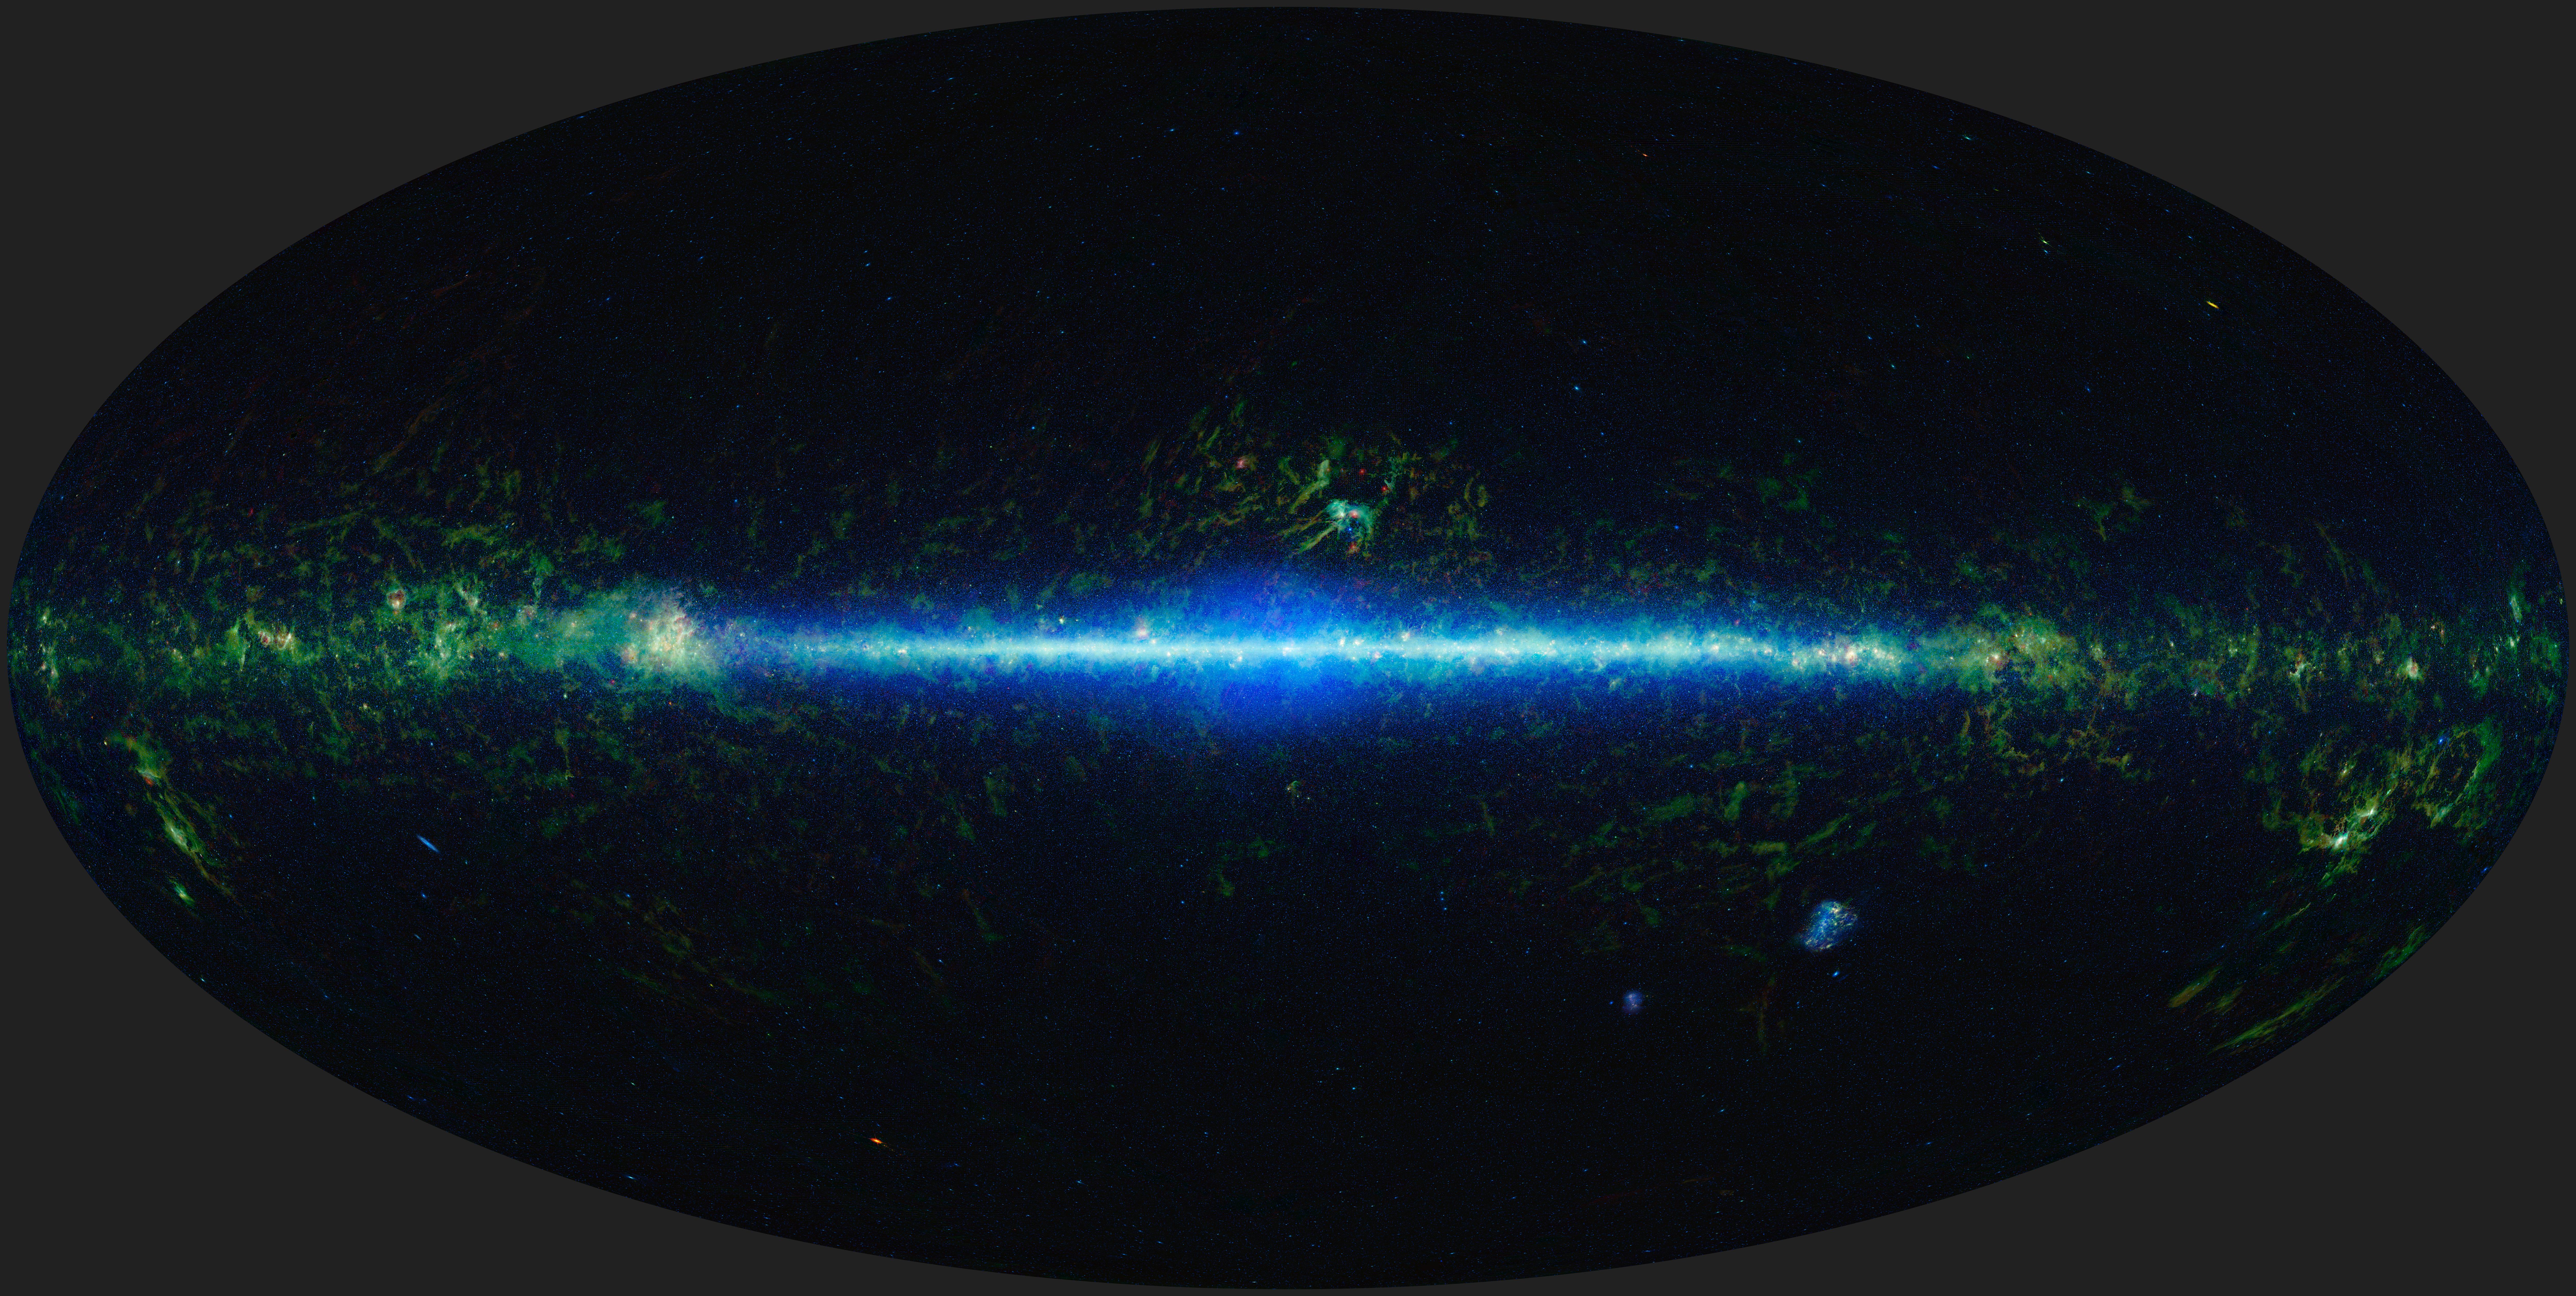 The image is an oval, which represents the sky folded out onto a flat surface. There is an electric blue, fuzzy light running left to right in the center of the image, showing emission from the plane of our Milky Way galaxy. About half way between the center of the image and the left edge, that blue line turns green and expands out into diffuse clouds. That blue line similarly expands into diffuse green clouds on the right side, too. Most of the rest of the image appears black with just a few spots of dim green clouds dotted around the image.